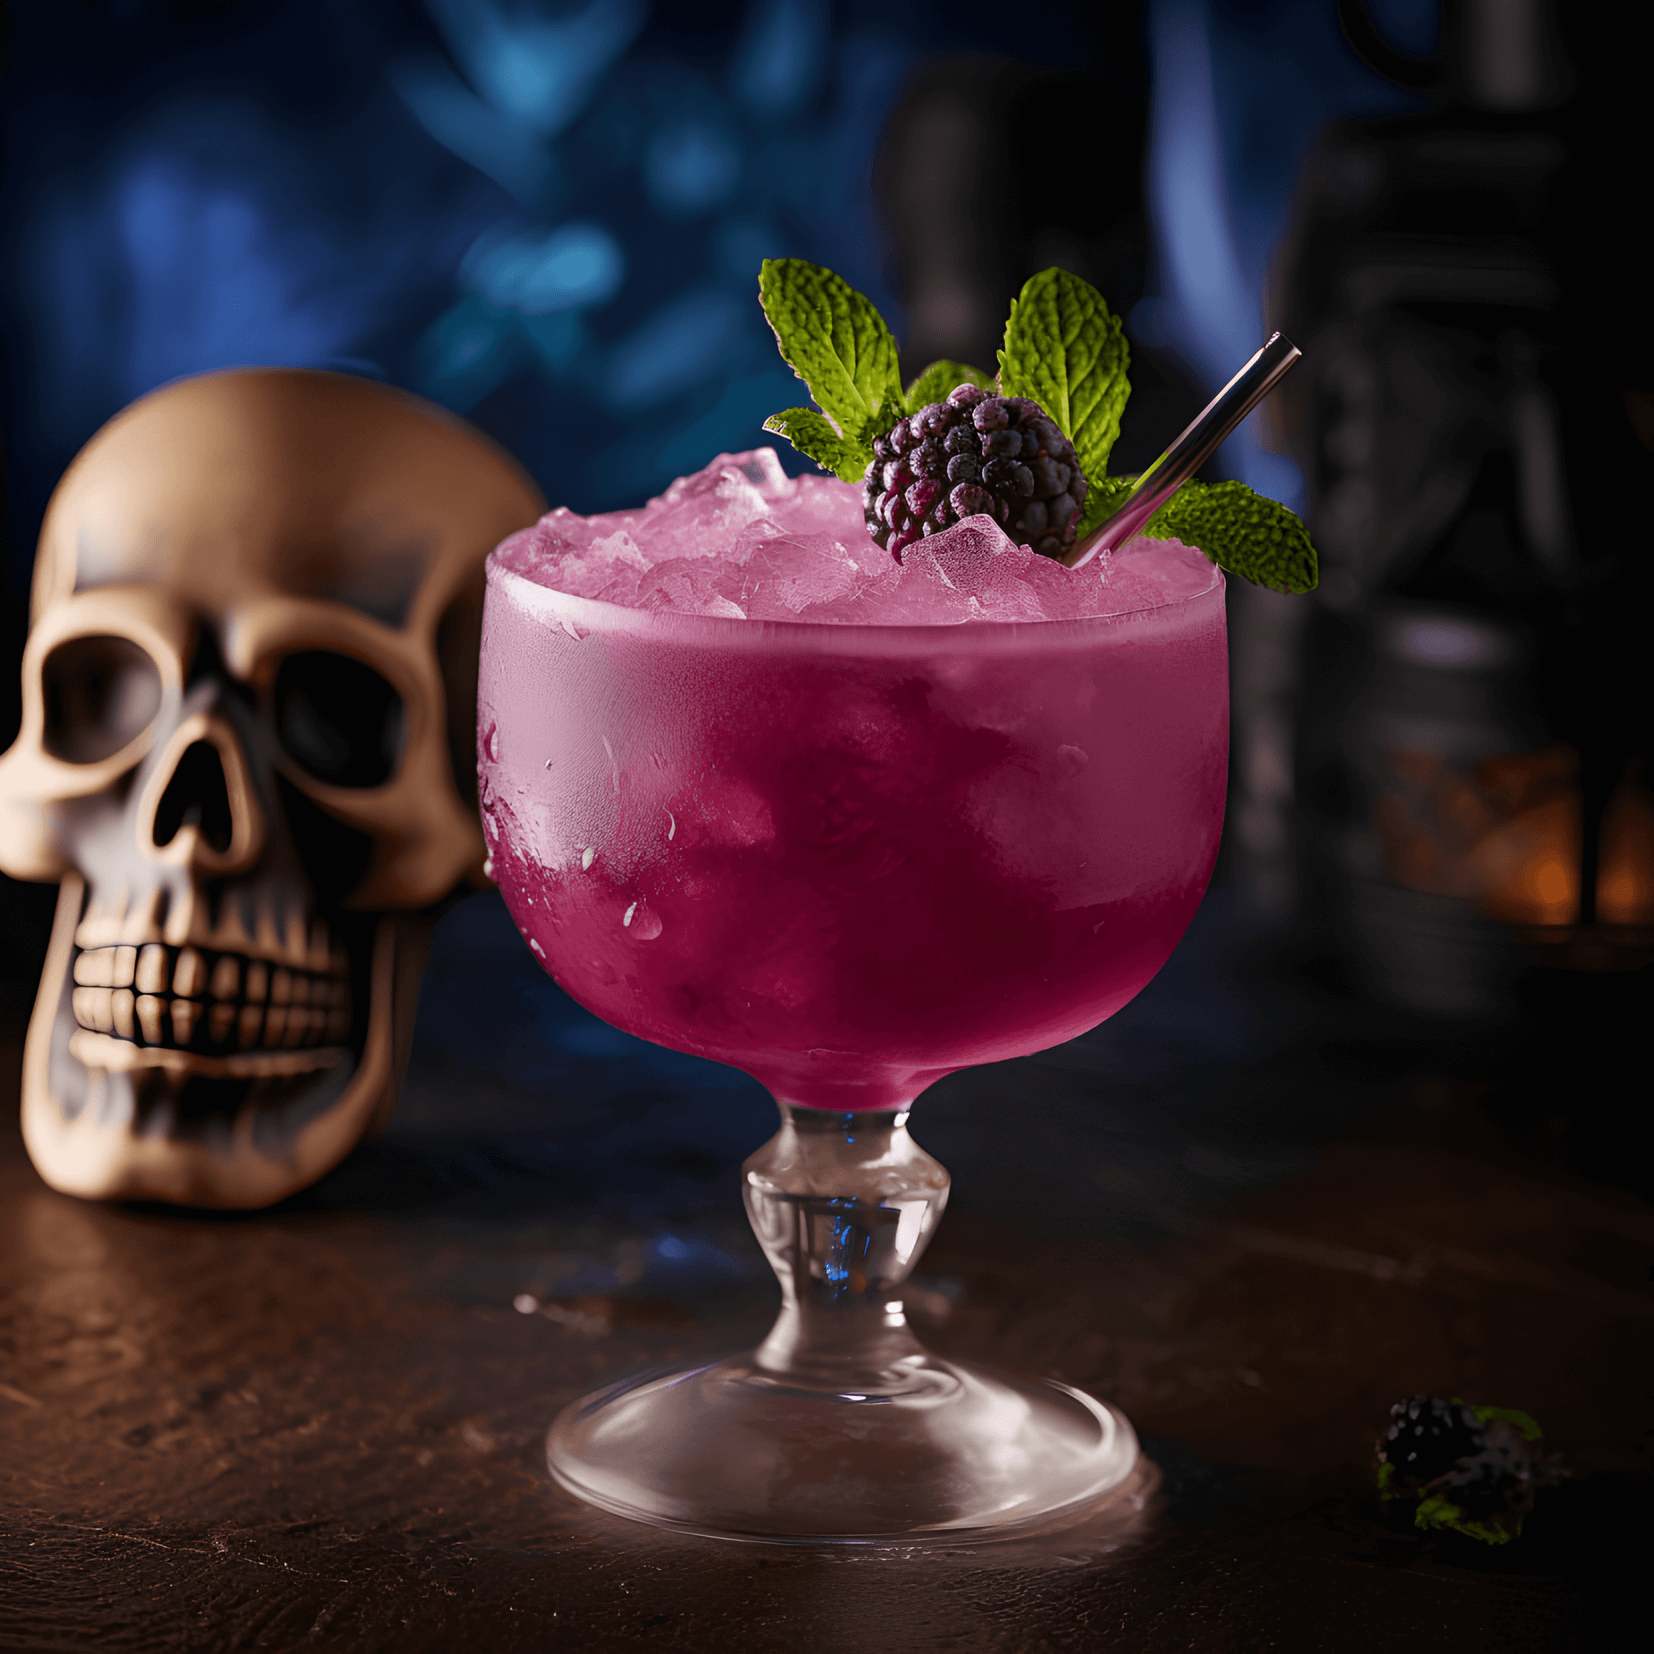 The Witch Doctor cocktail offers a complex and intriguing taste profile, featuring a blend of sweet, sour, and slightly spicy flavors. The combination of fruity and herbal ingredients creates a unique and enchanting experience for the palate.